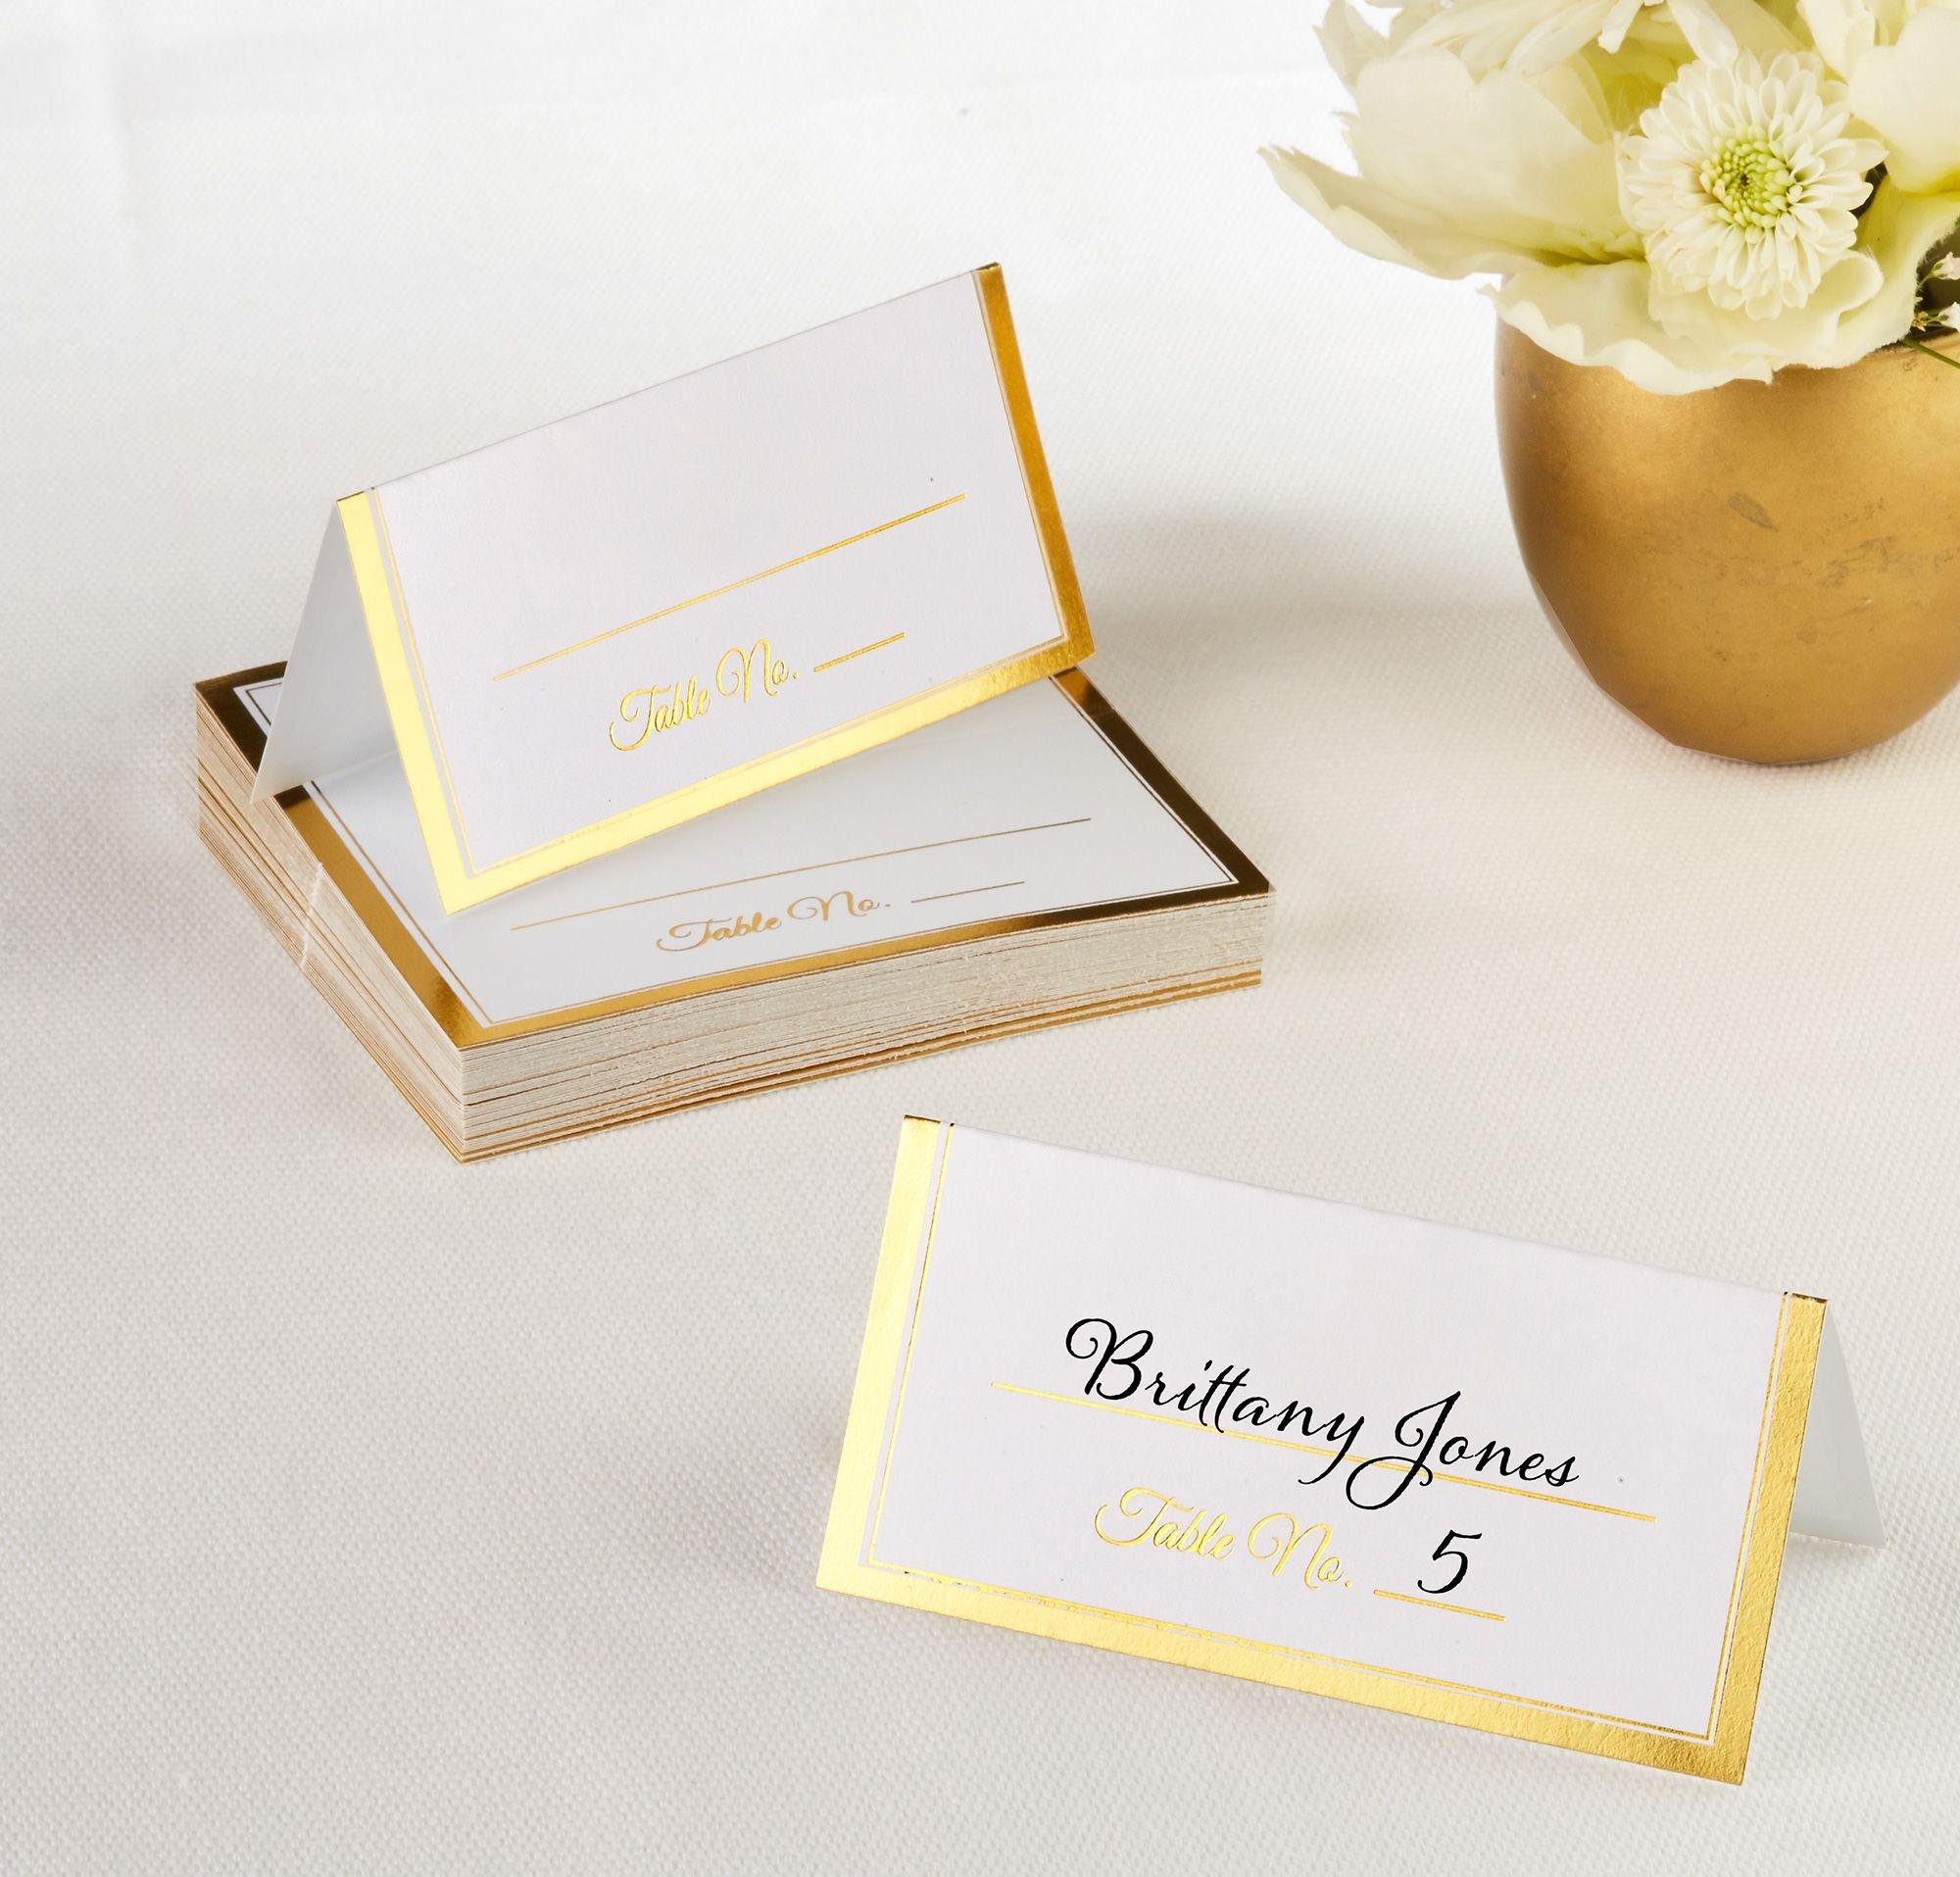 Ornate Border Place Cards - 50 Count - Gold